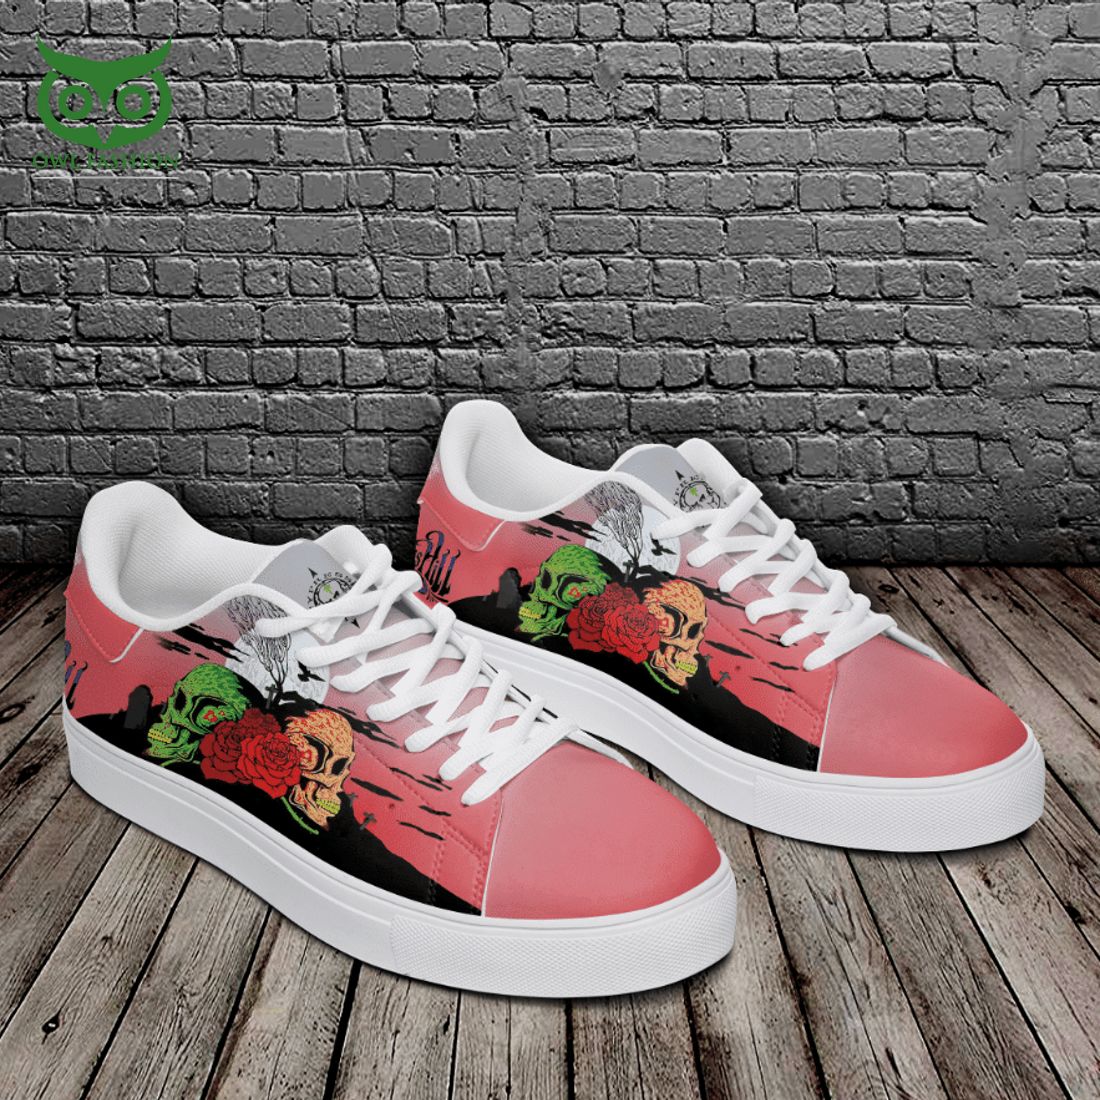 cypress hill skull roses 3d printed stan smith shoes 2 yPaoI